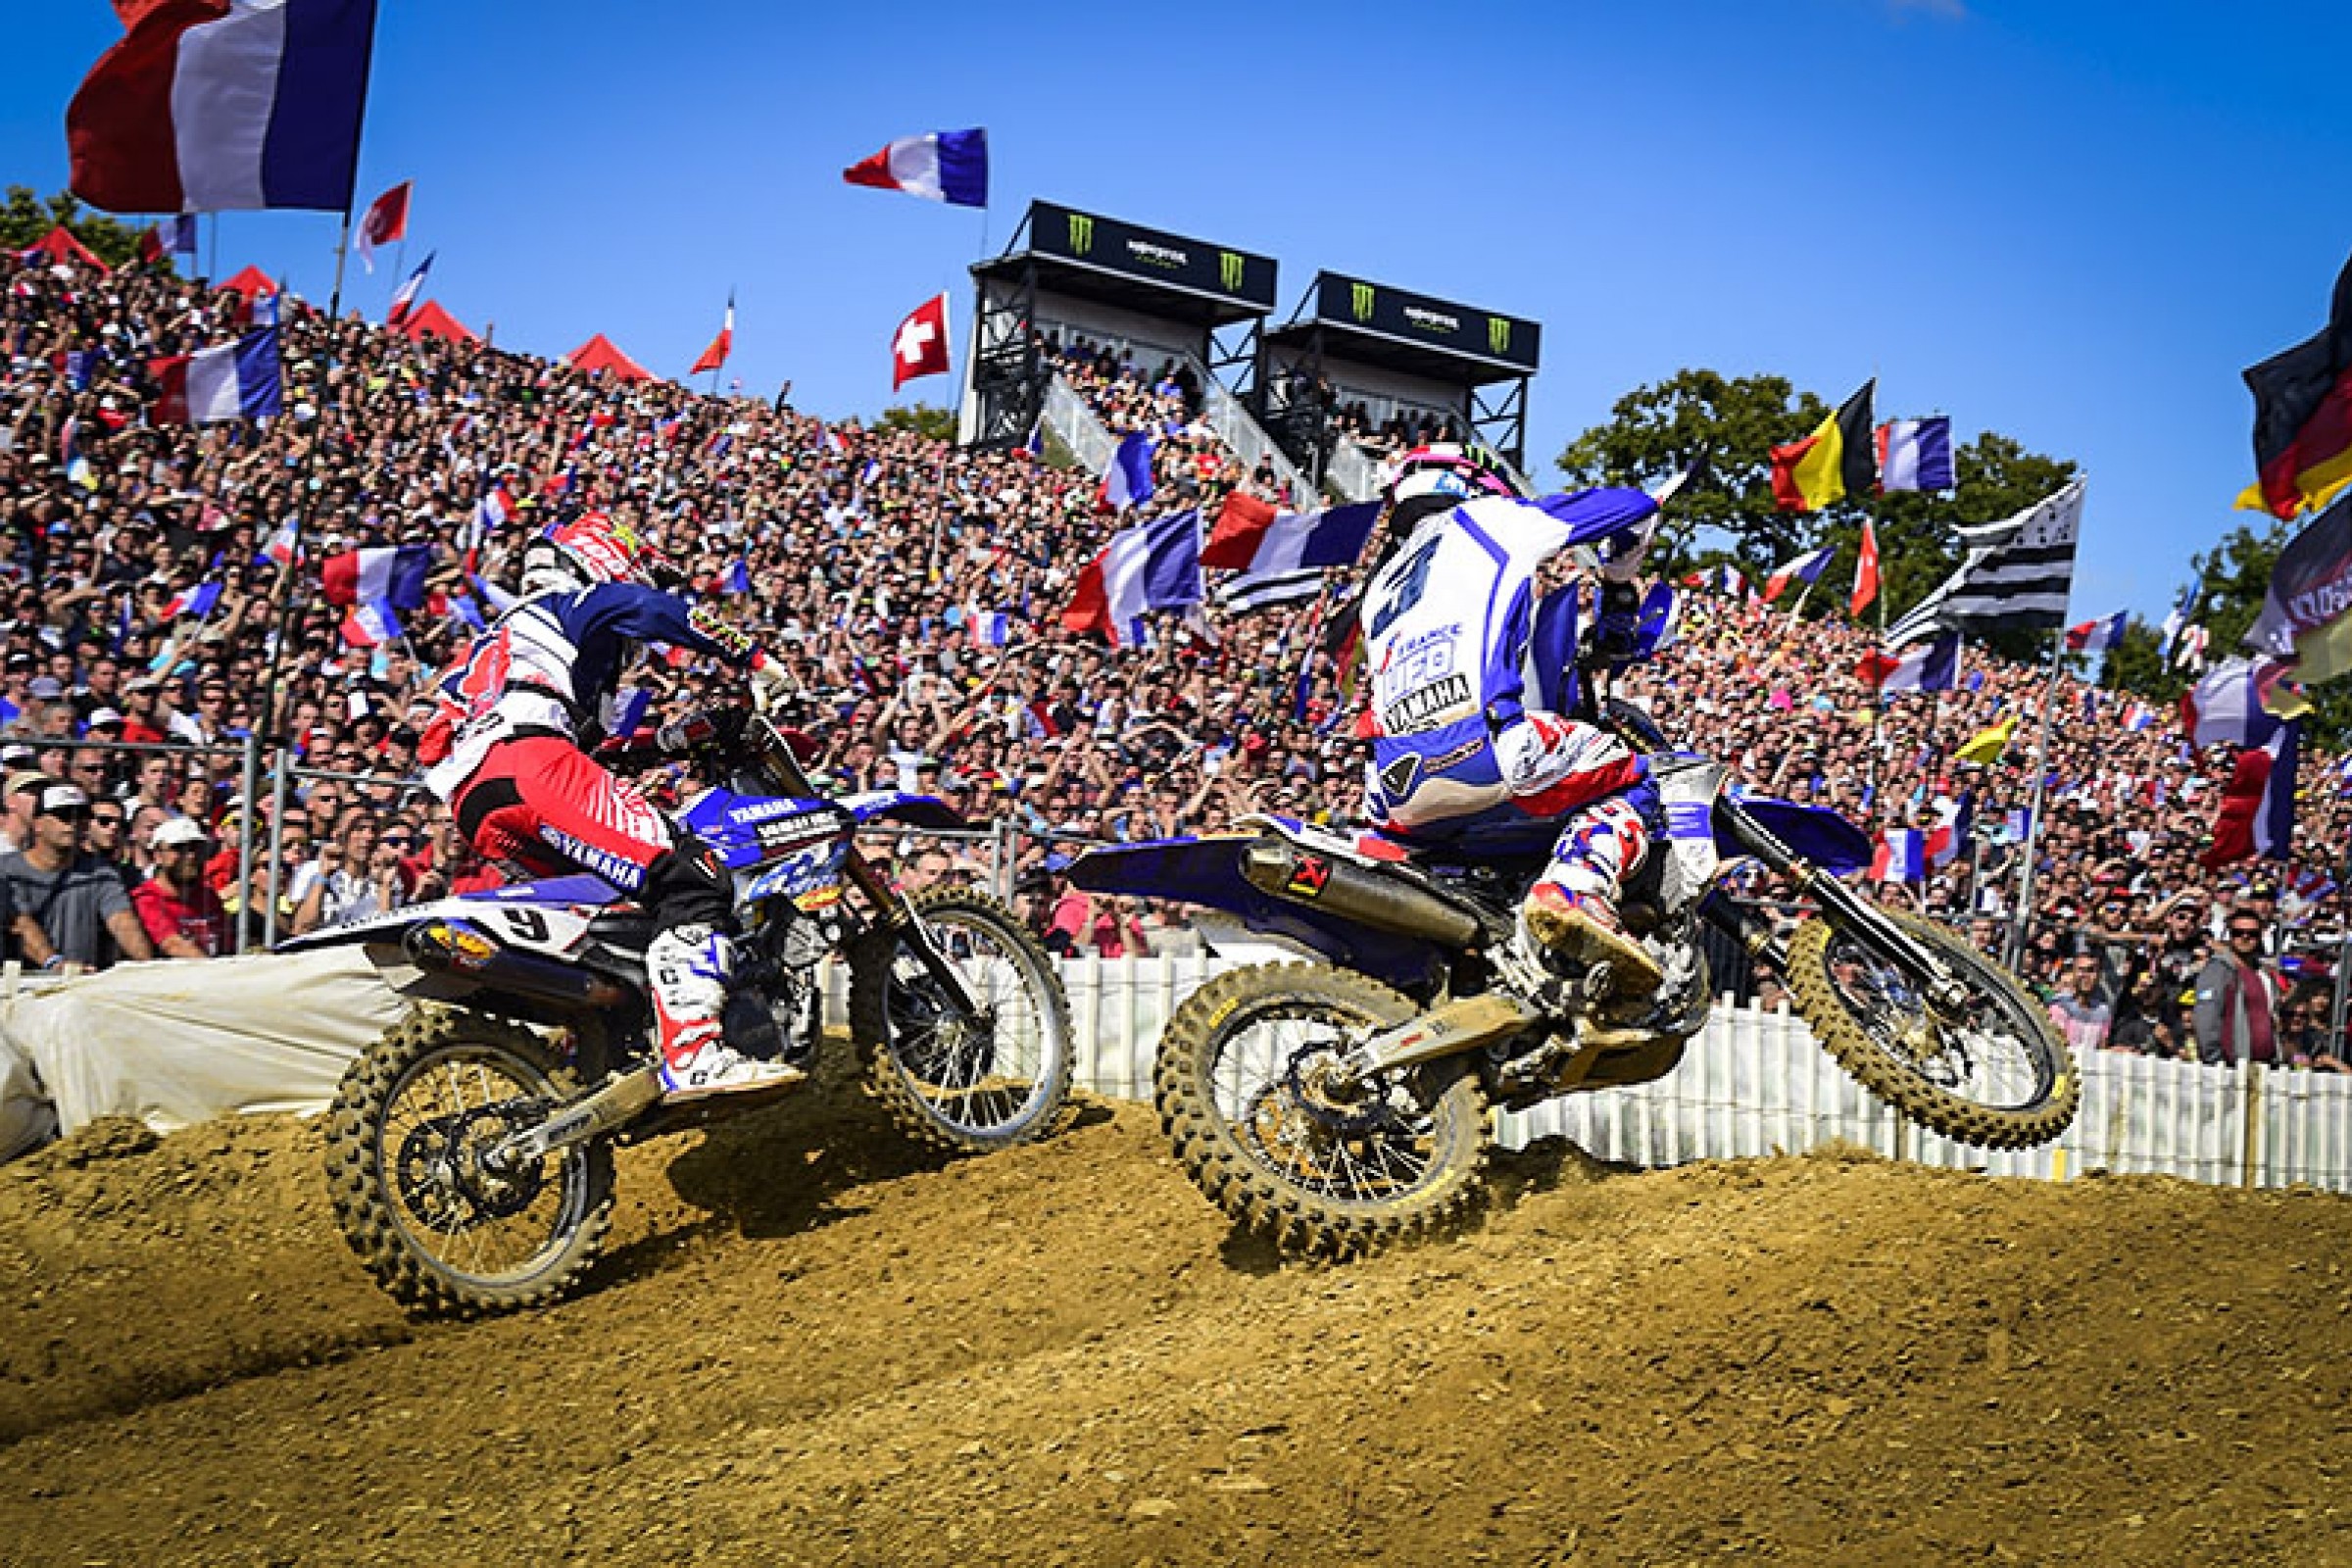 Motocross of Nations to Air Live on CBS Sports Network - Racer X Online2400 x 1600